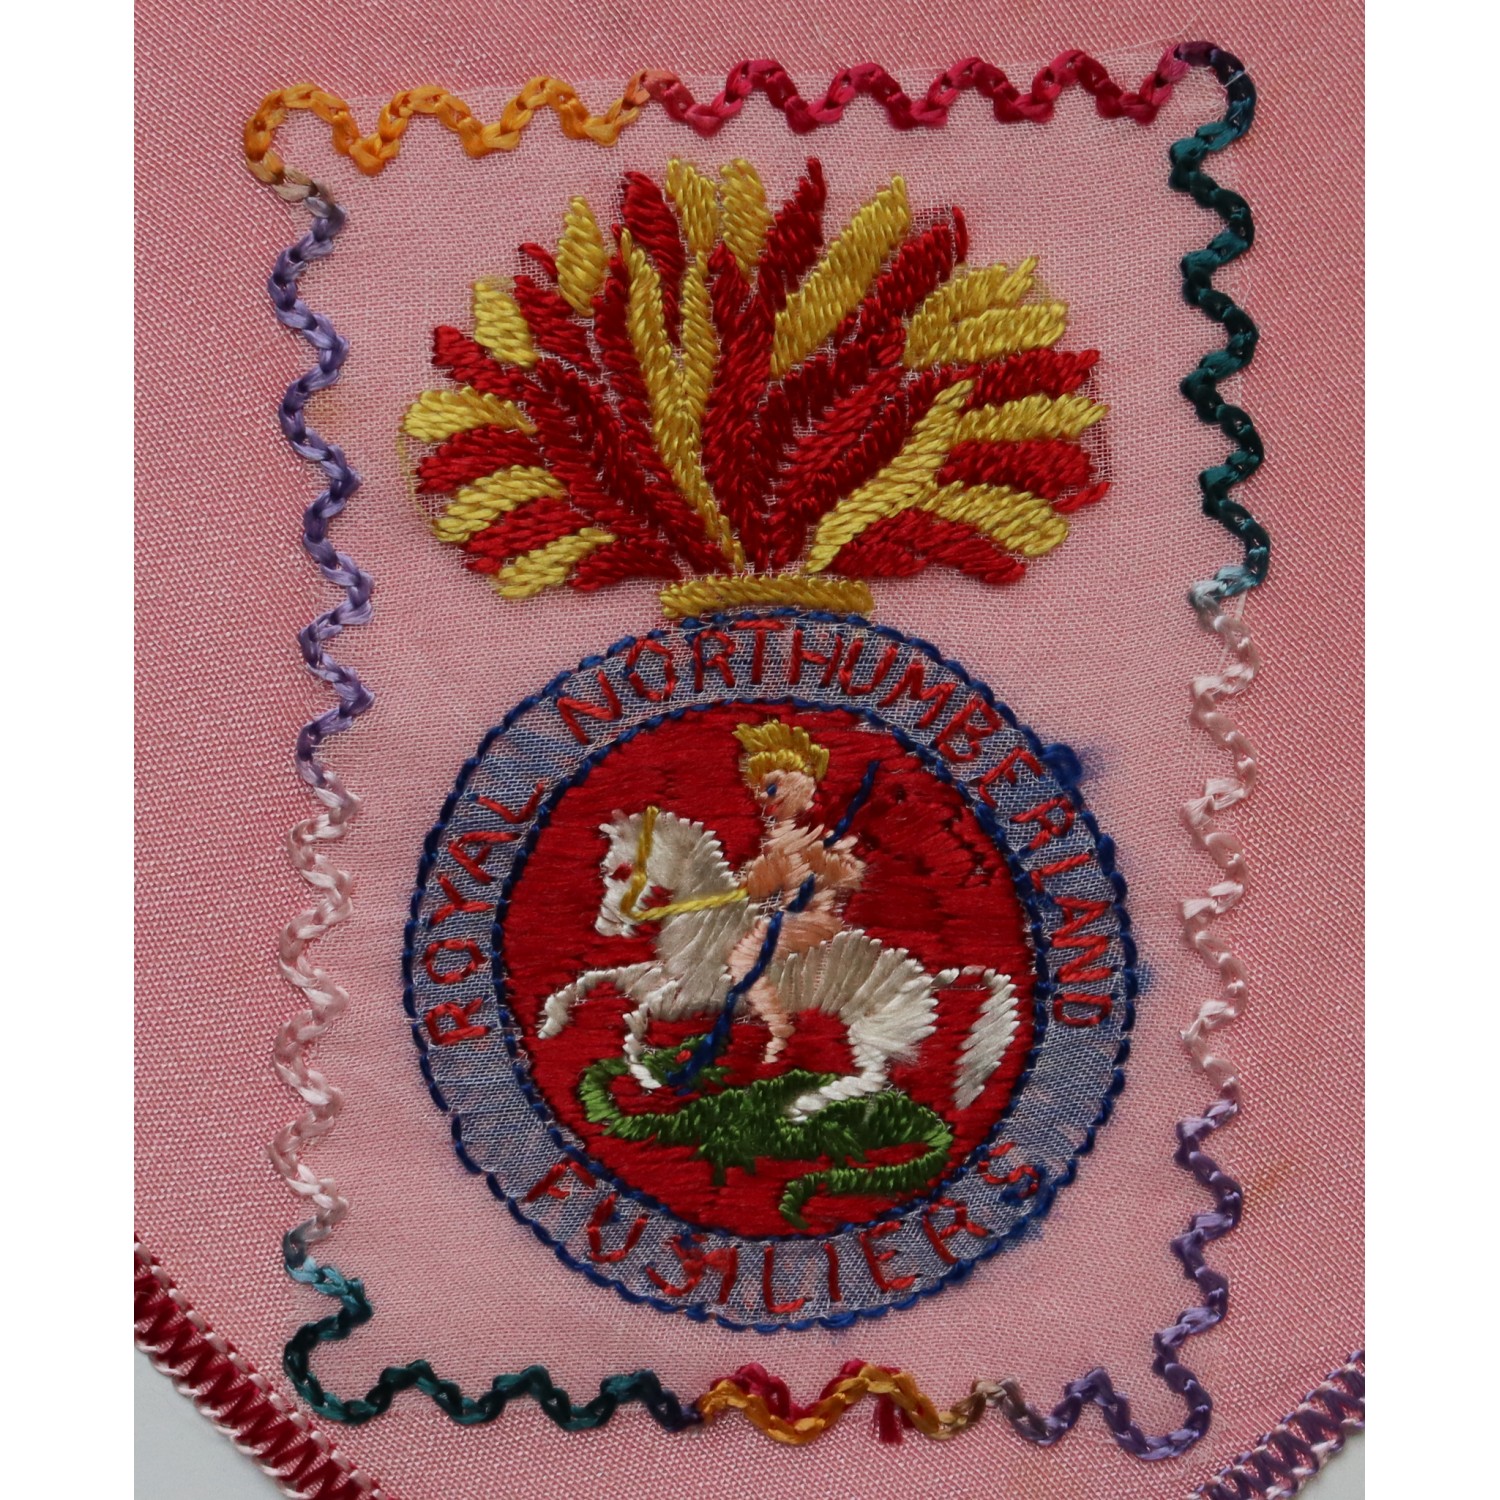 Royal Northumberland Fusiliers Embroidered Handkerchief